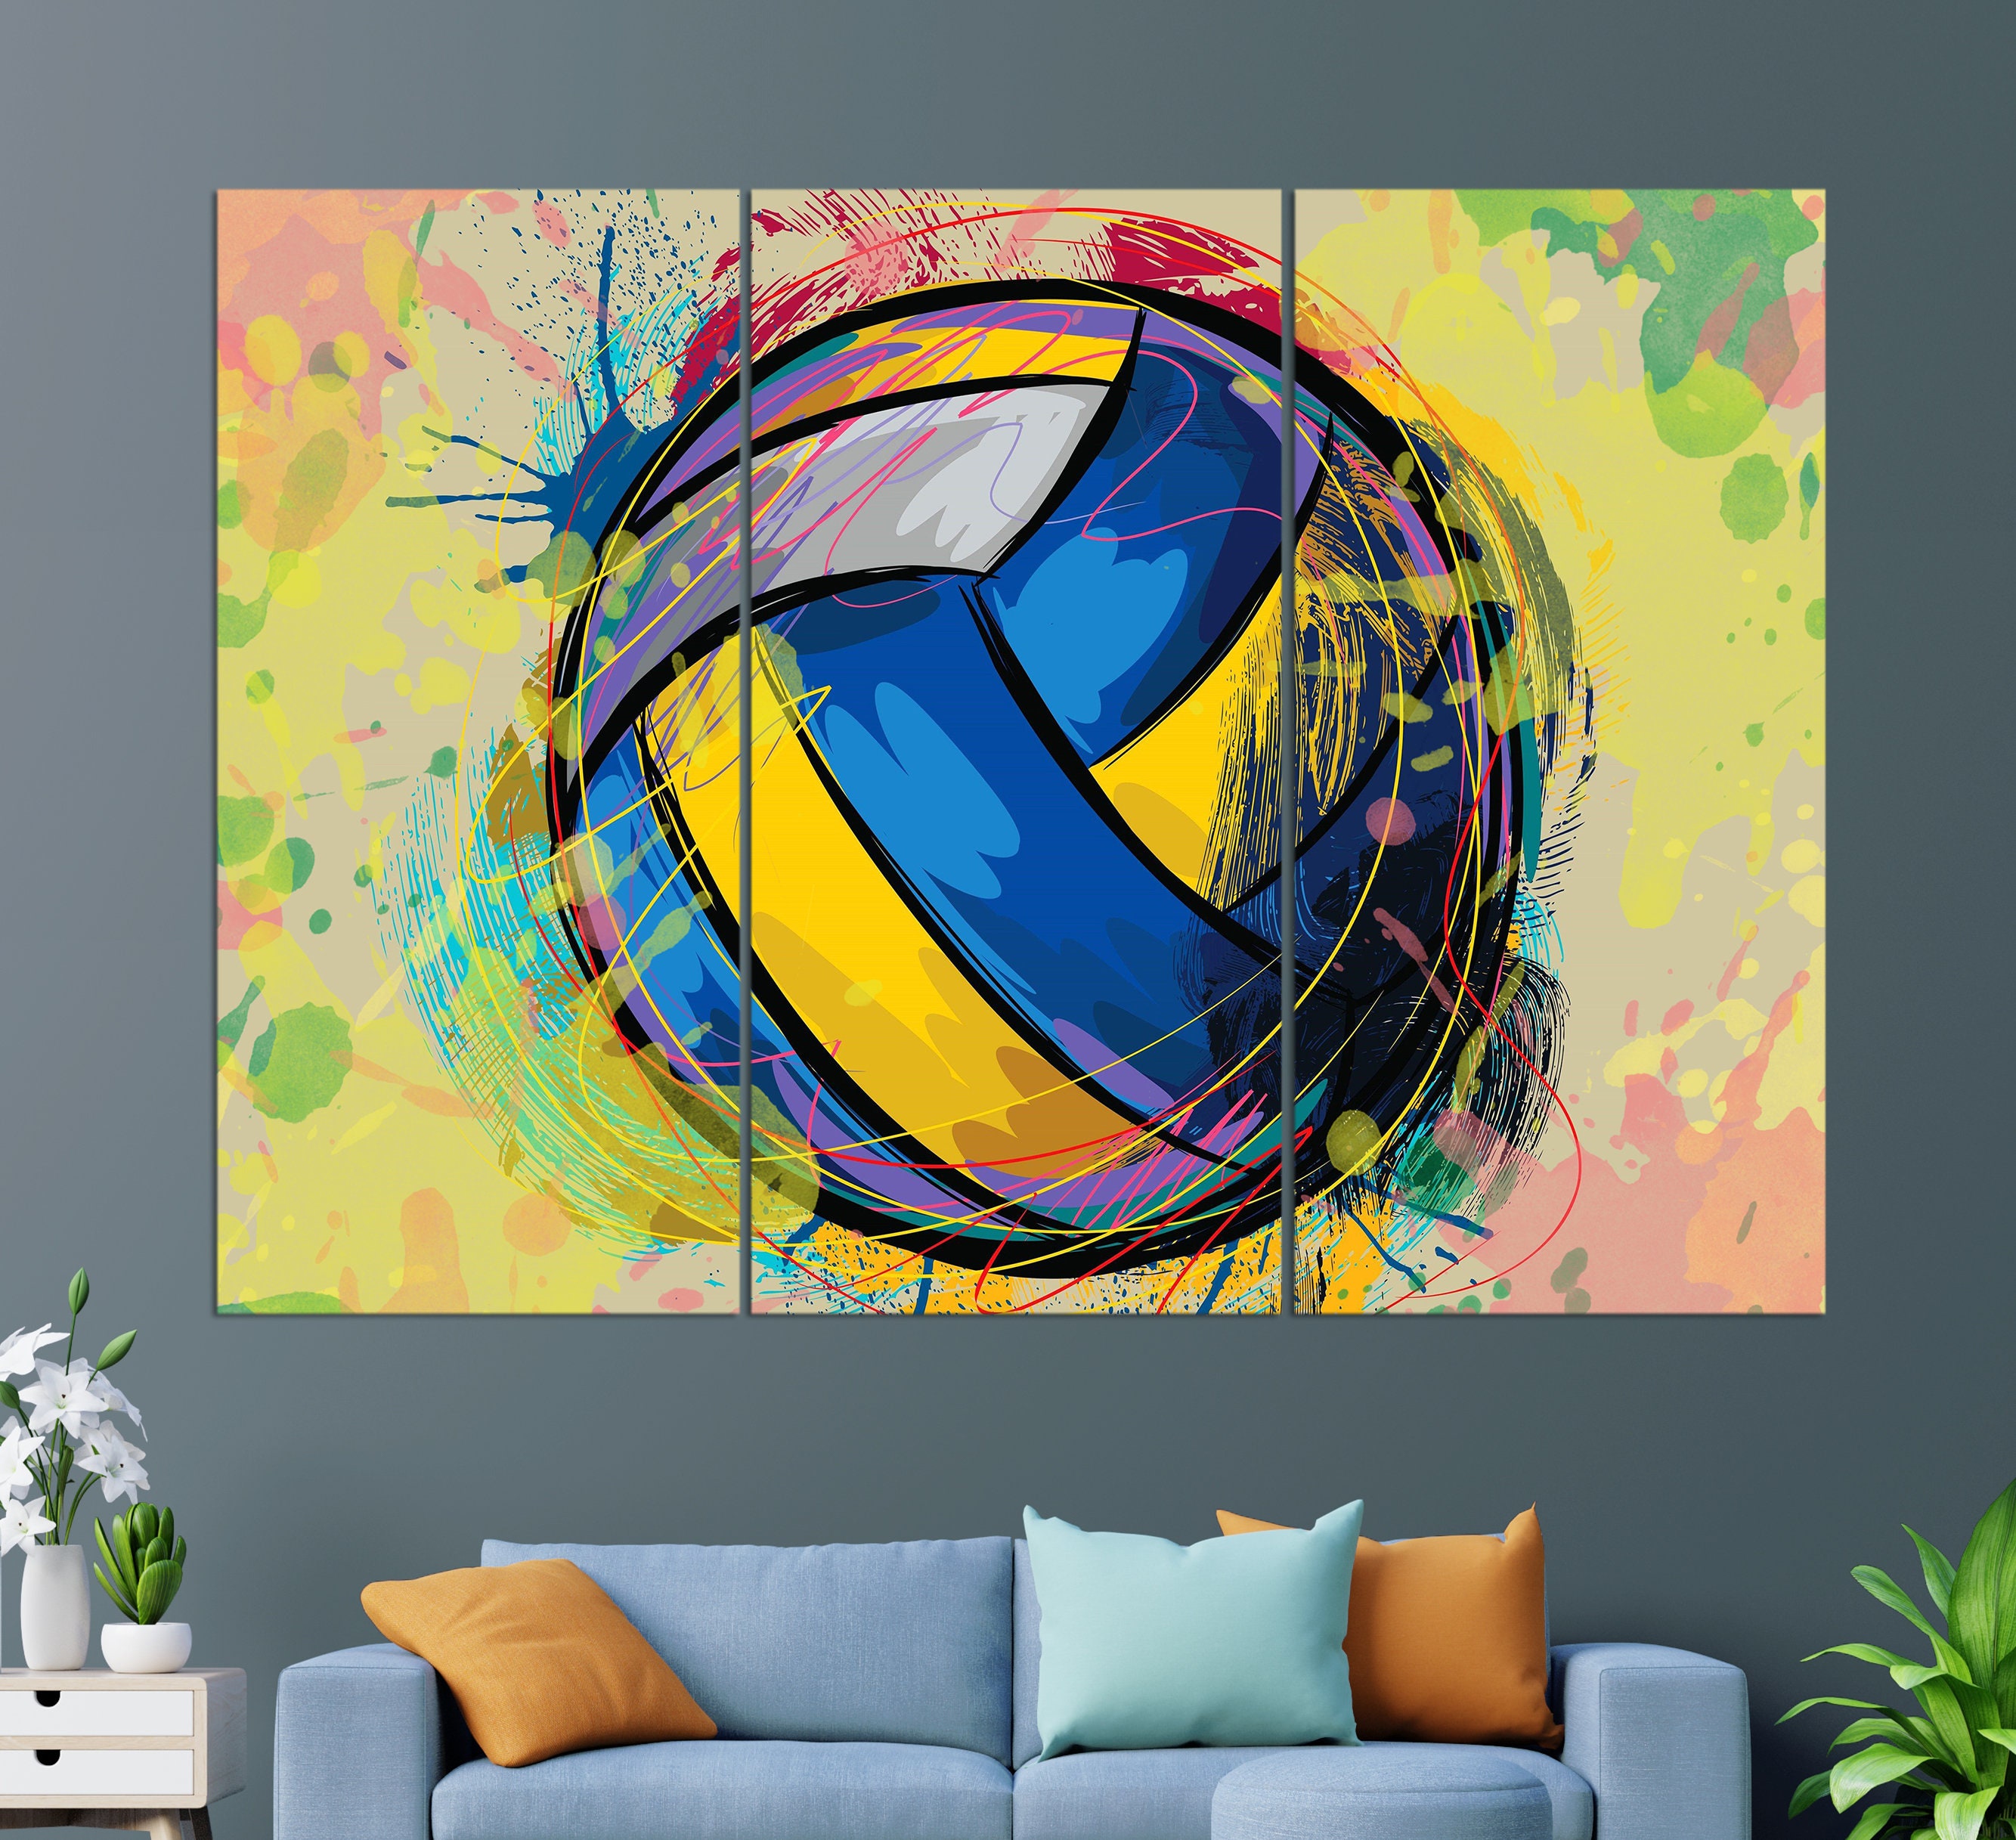 Vibrant Volleyball - Printed Paint Kit - Paint Parties by DecoArt